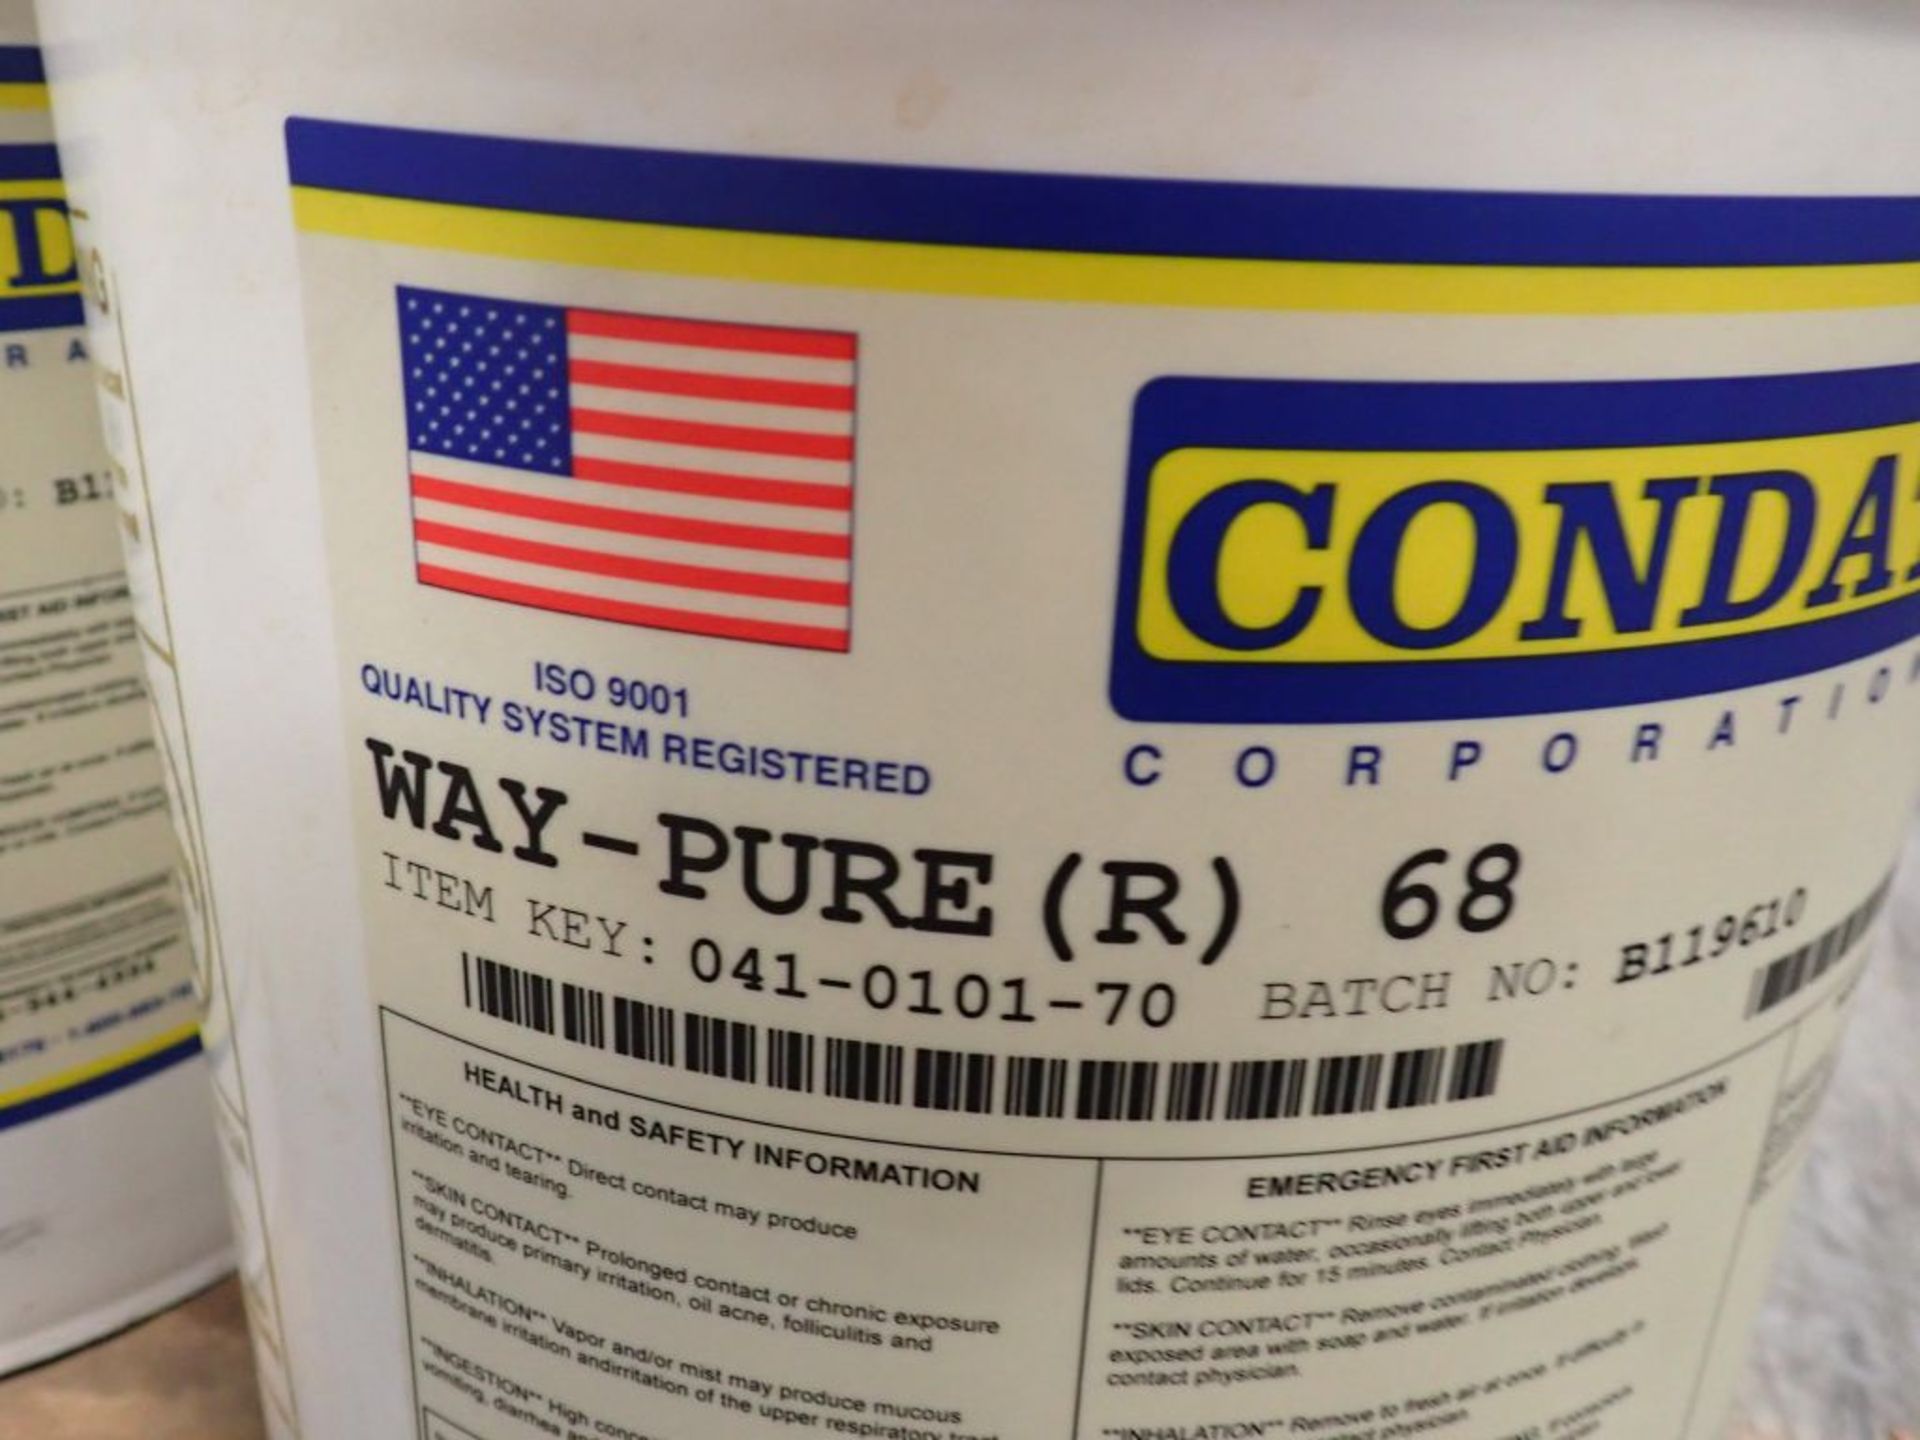 Lot of (4) Containers of 5-Gallon Condat Wire Lubricant | Item Key: 041-0191-70; New Surplus - Image 5 of 12